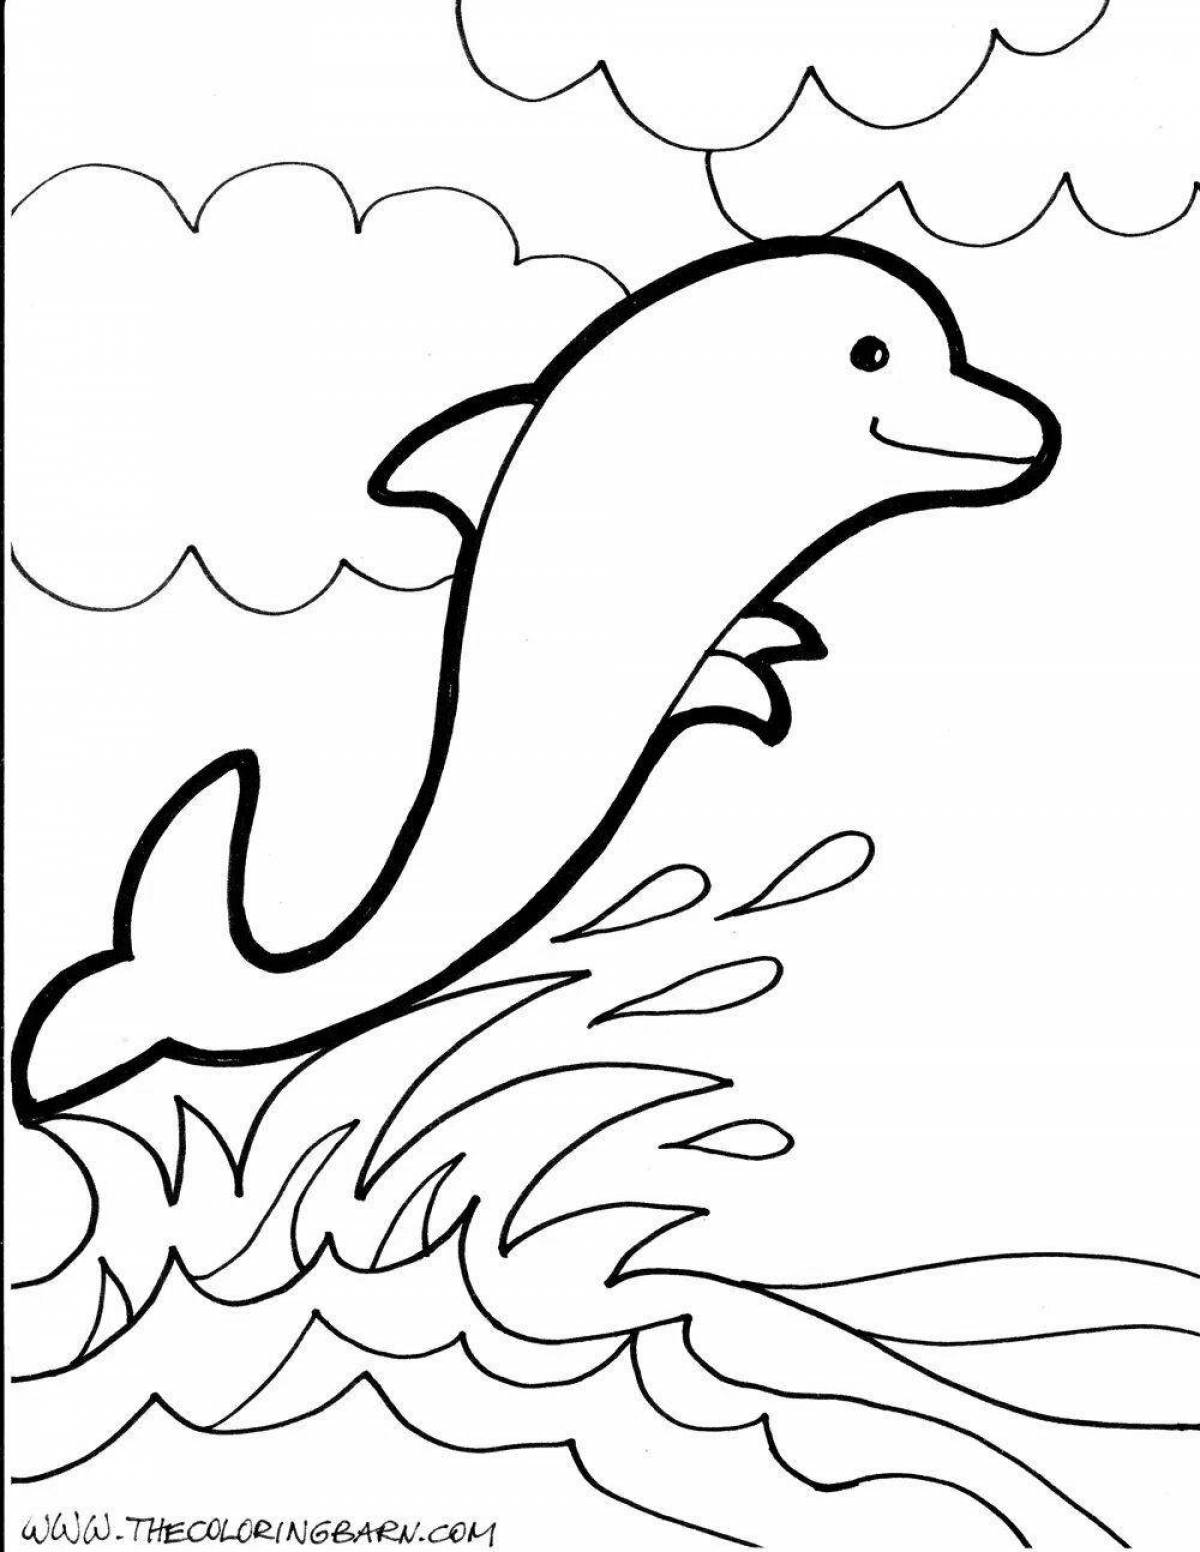 Cute dolphin coloring pages for kids